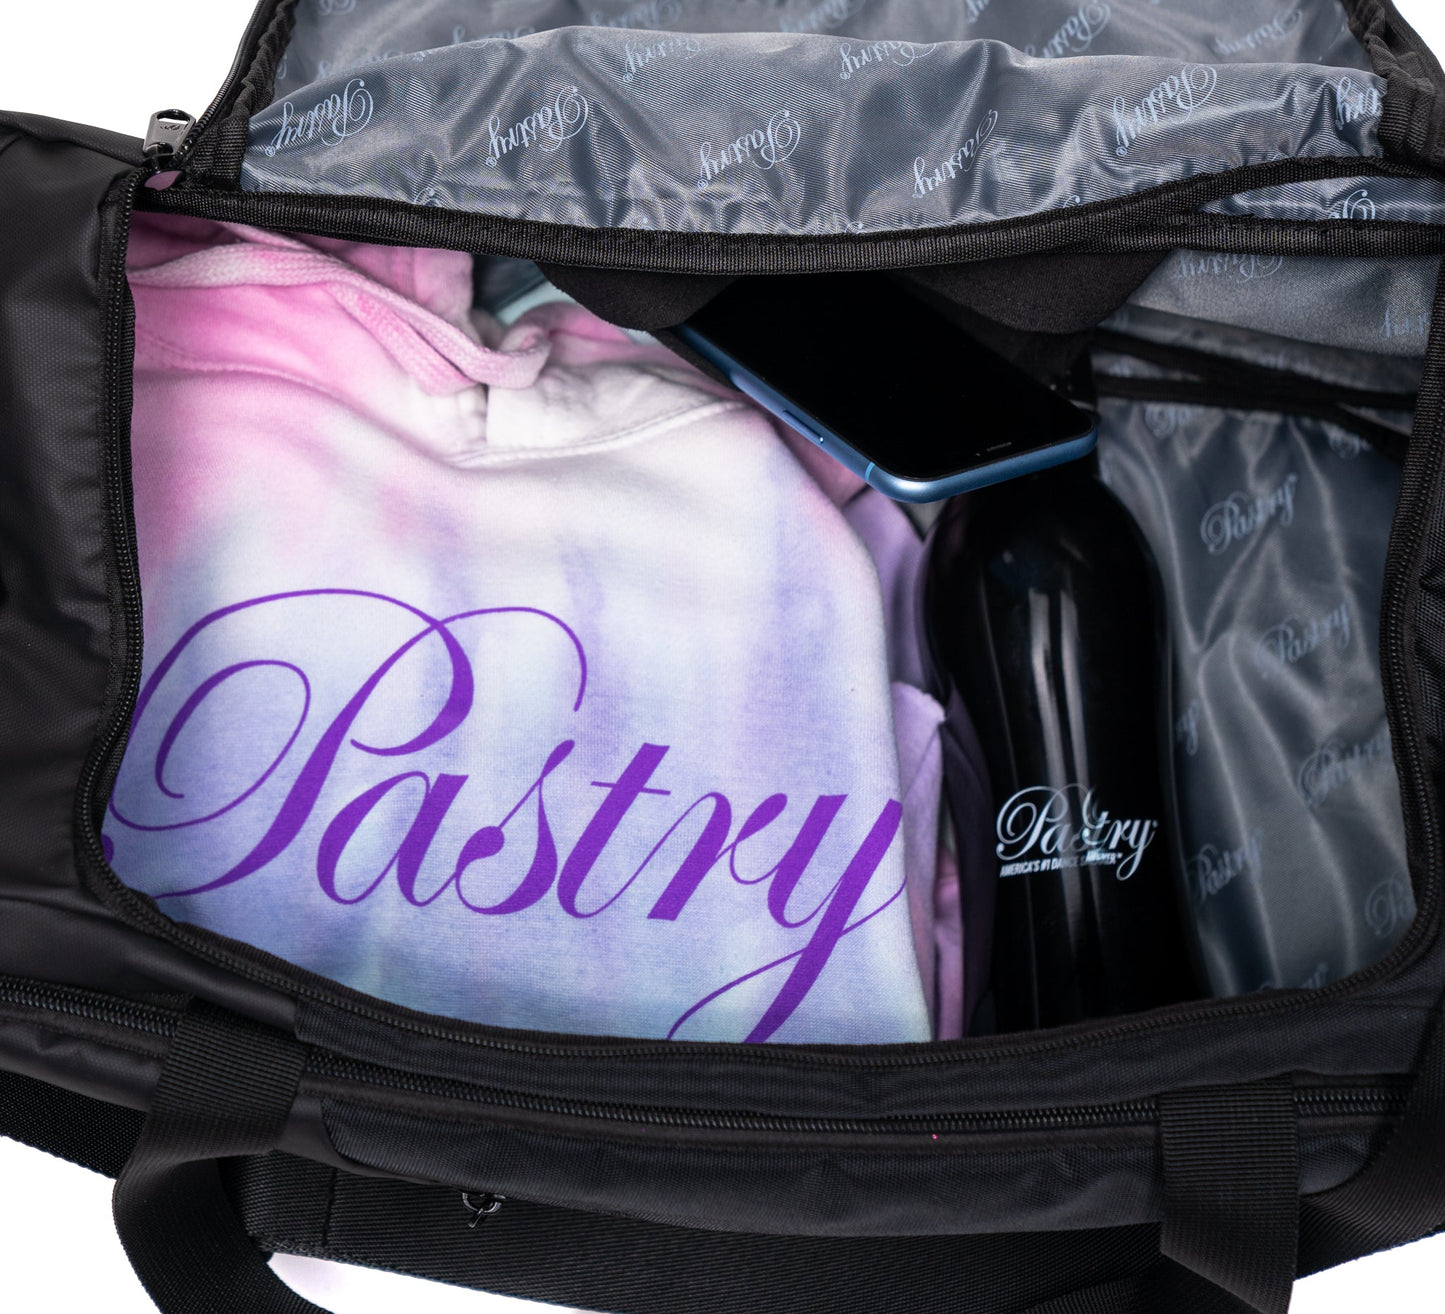 Pastry Duffle Bag Glitter Black with clothes and tumbler inside